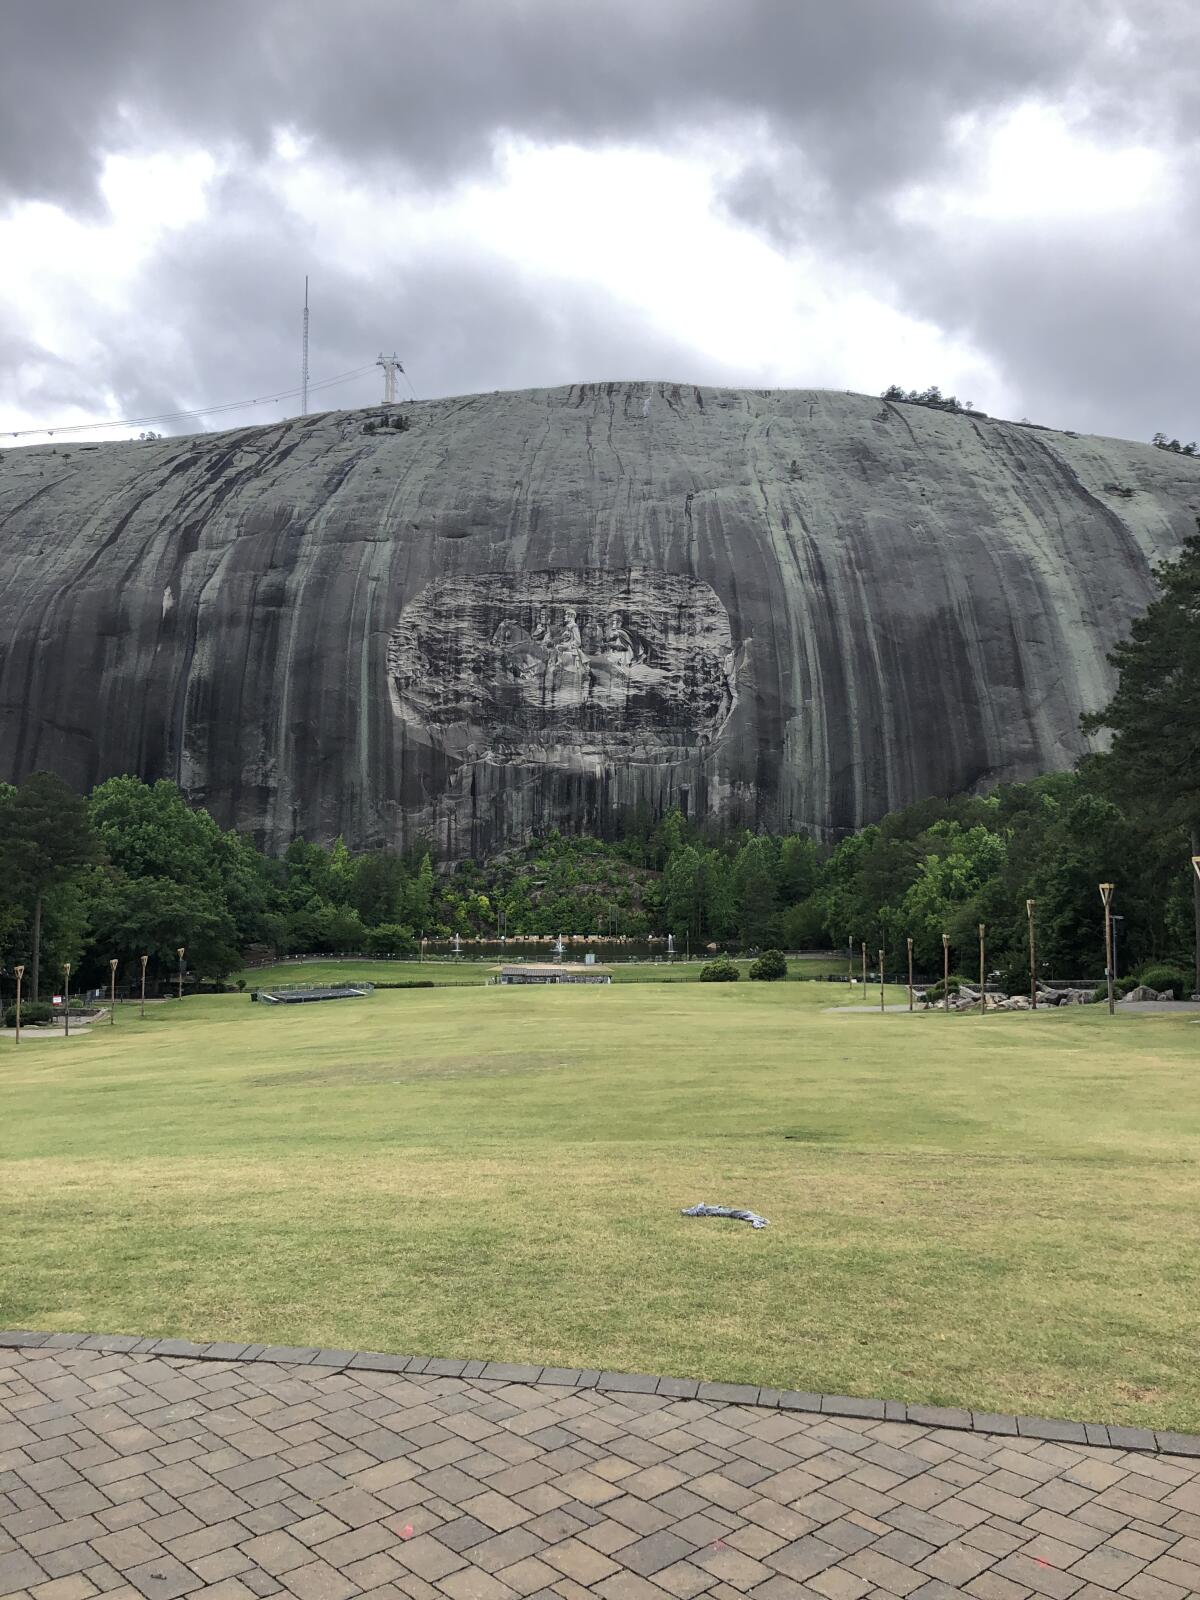 An etching on a bare stone mountain is seen from a distance, across a grassy lawn, on a rainy day.